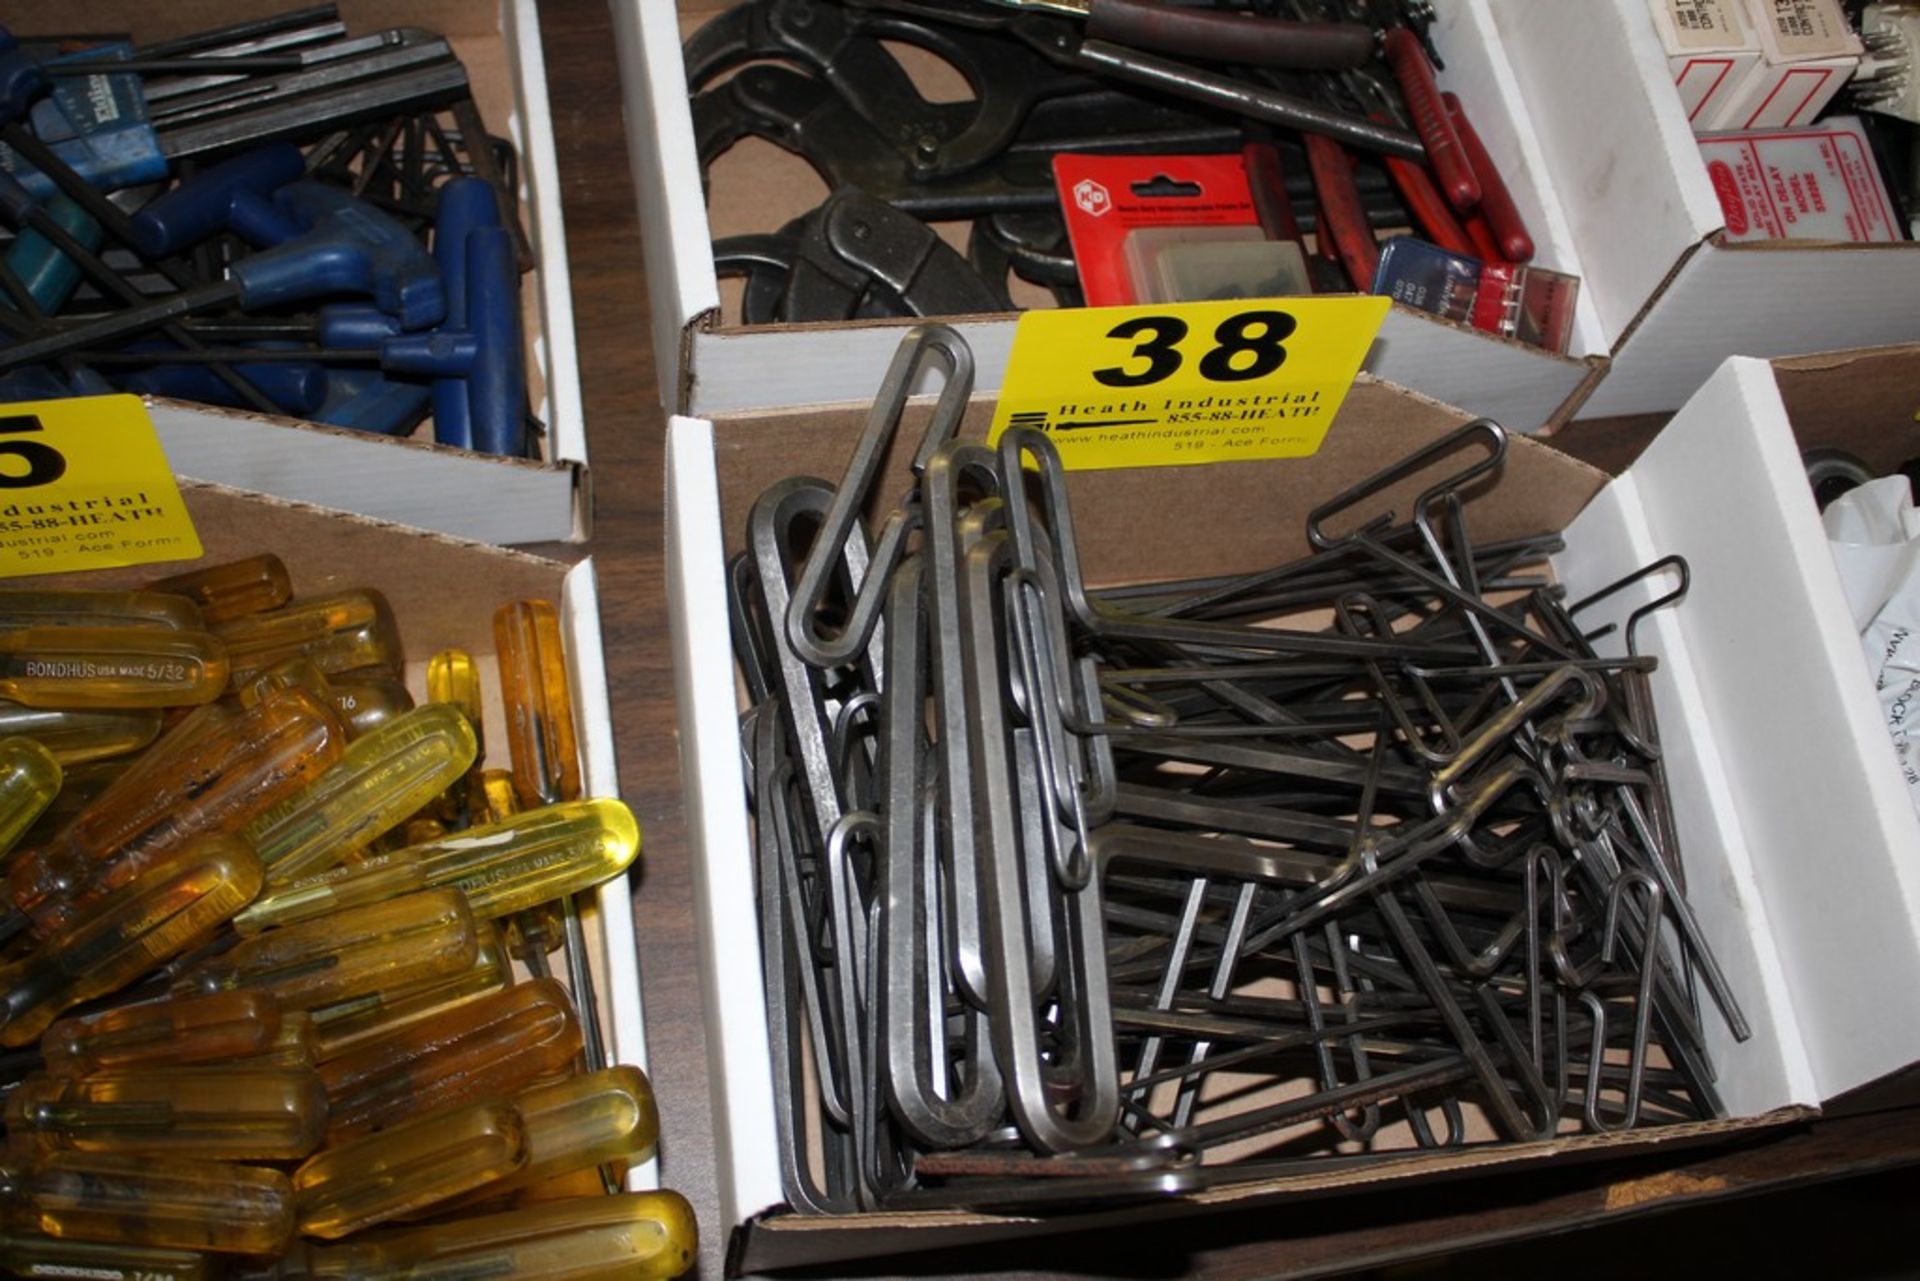 LARGE QTY OF ALLEN WRENCHES IN BOX